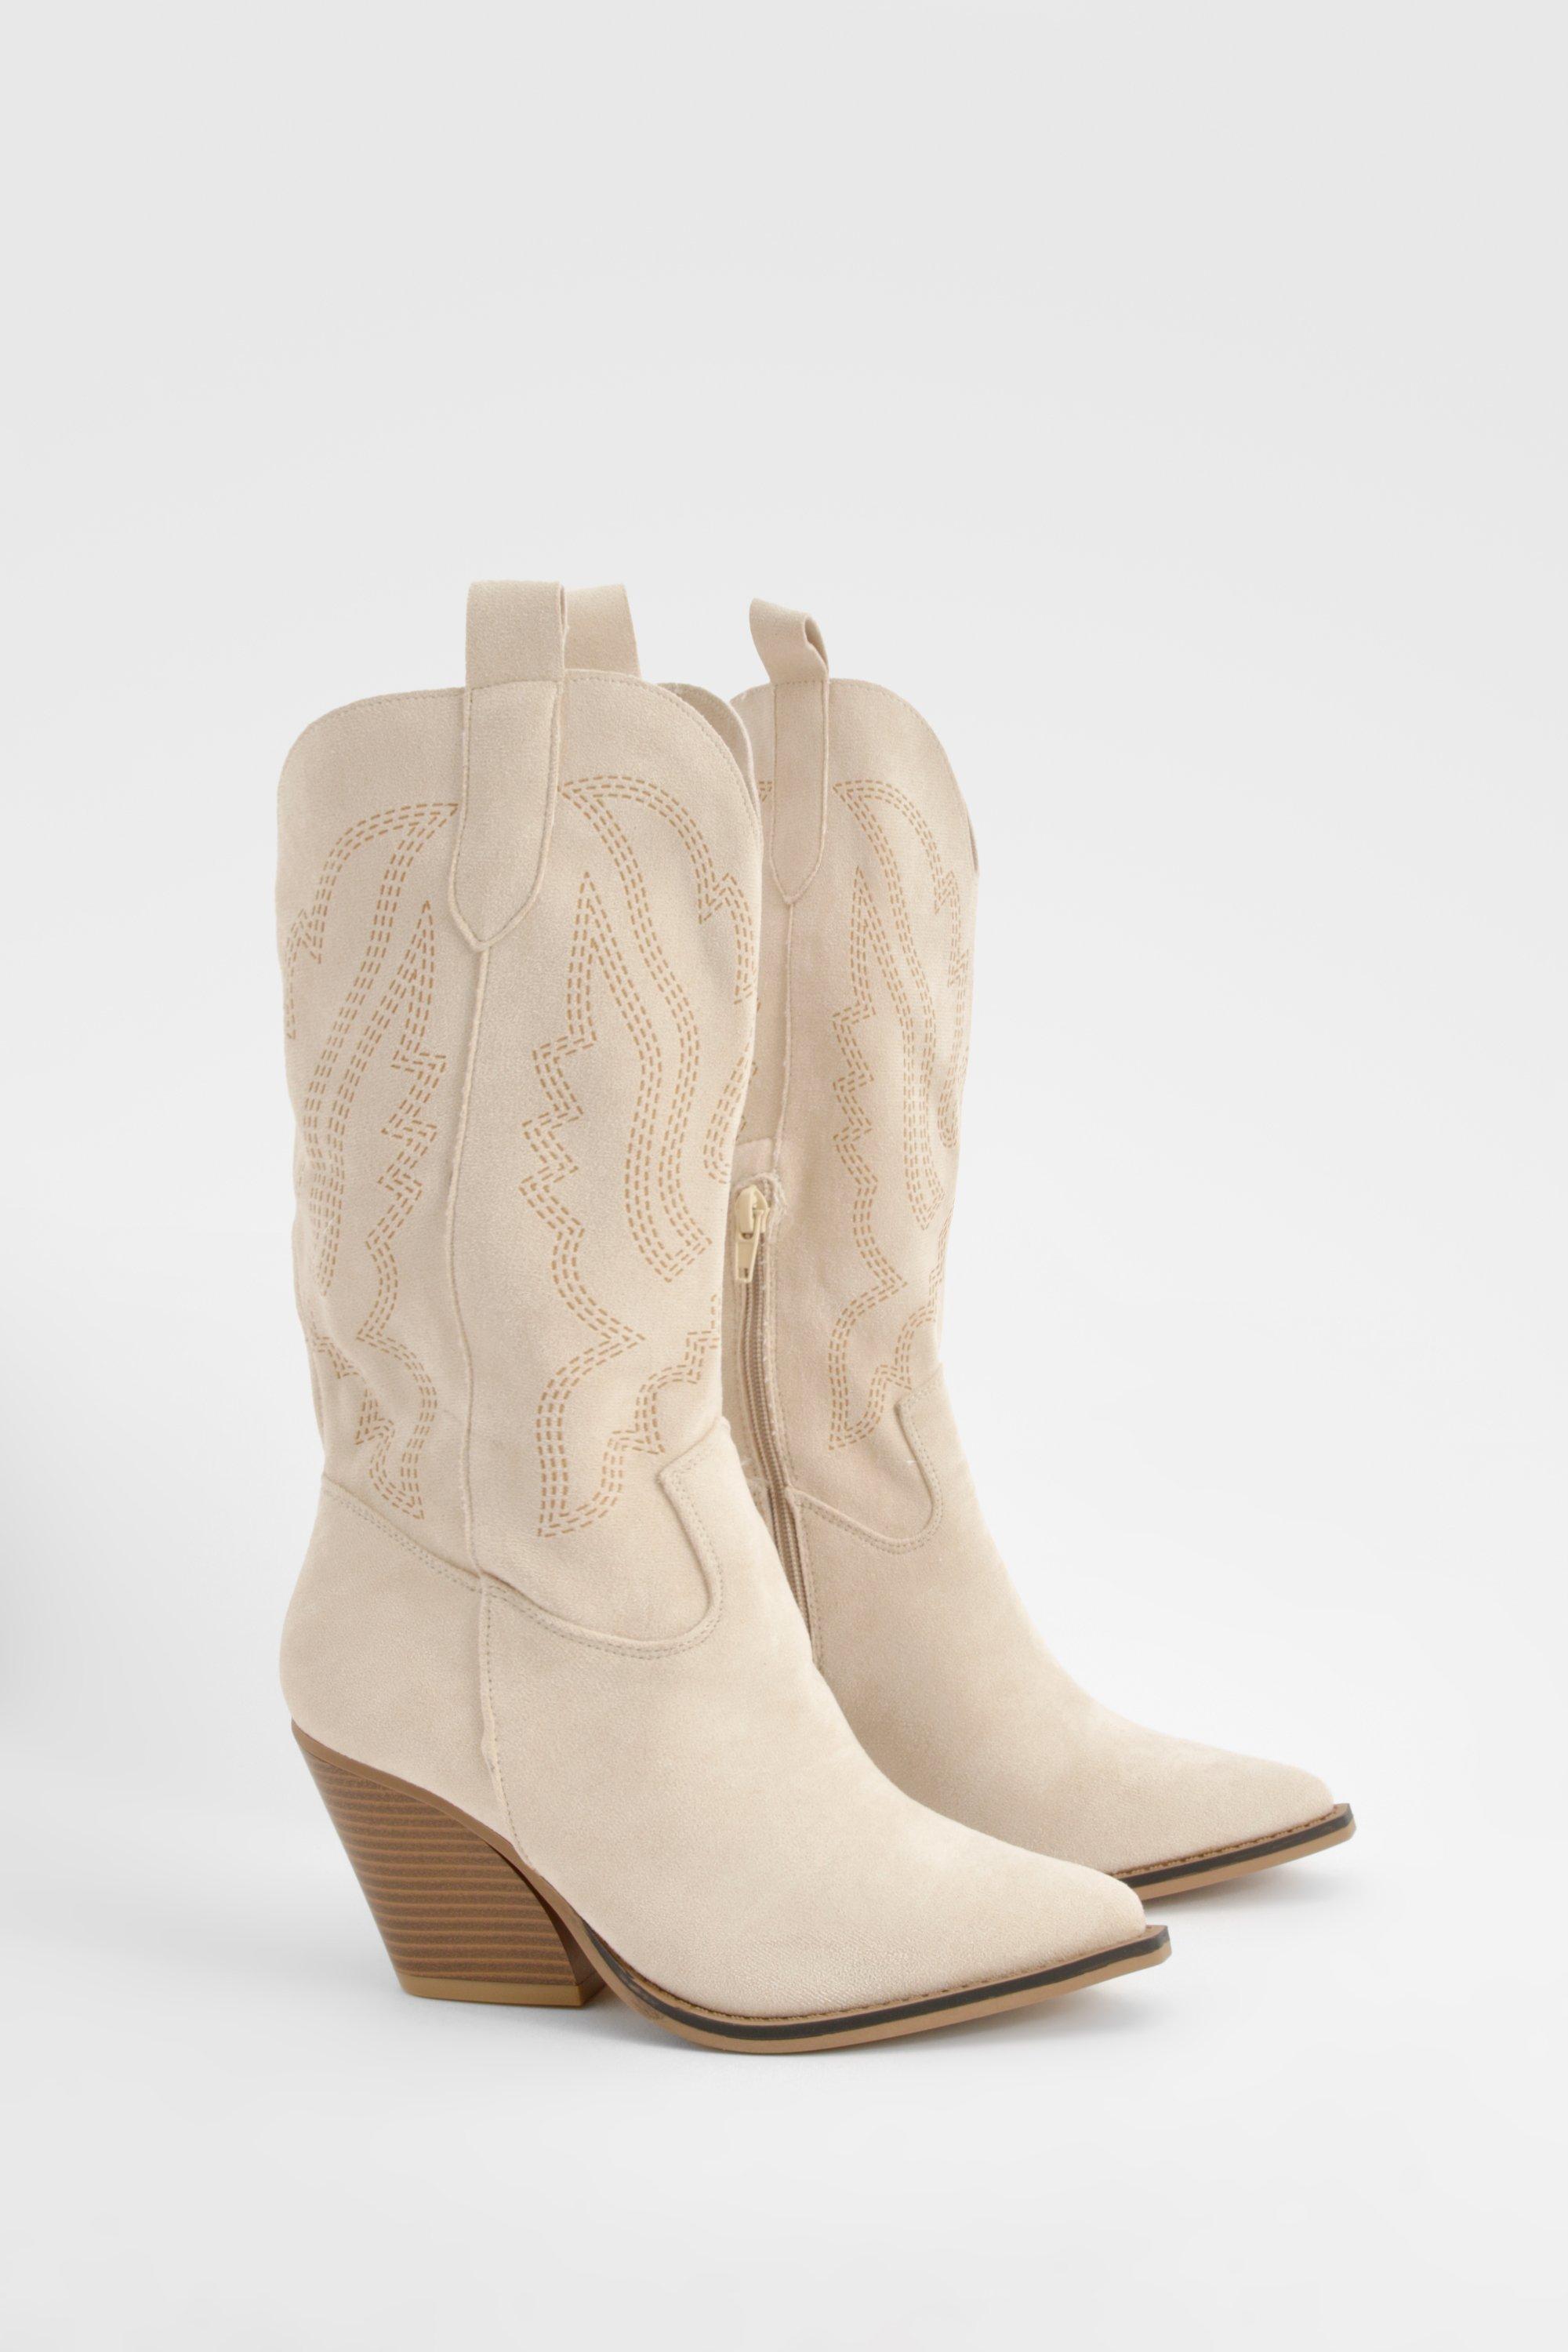 Boohoo Embroidered Western Boots, Taupe